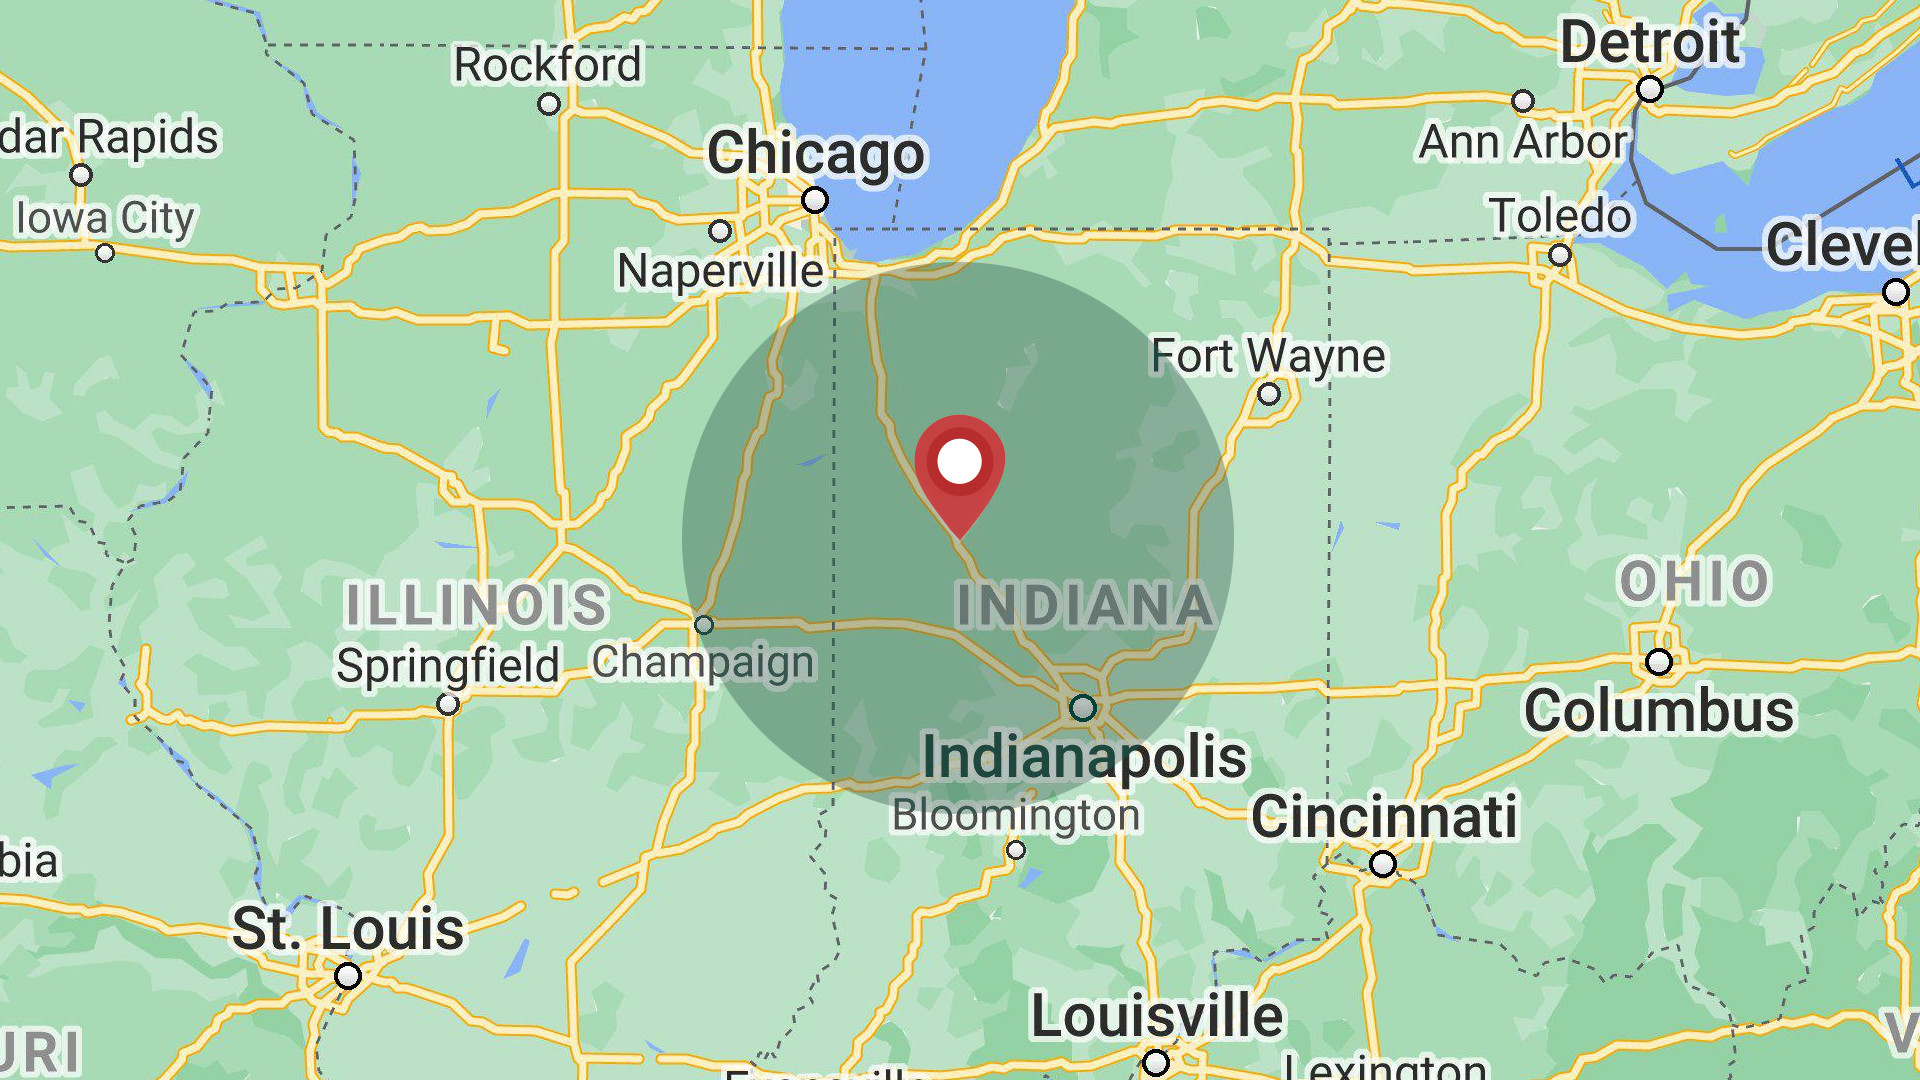 Tri Tech Construction's service area includes Lafayette, Indiana and it's surroundings.